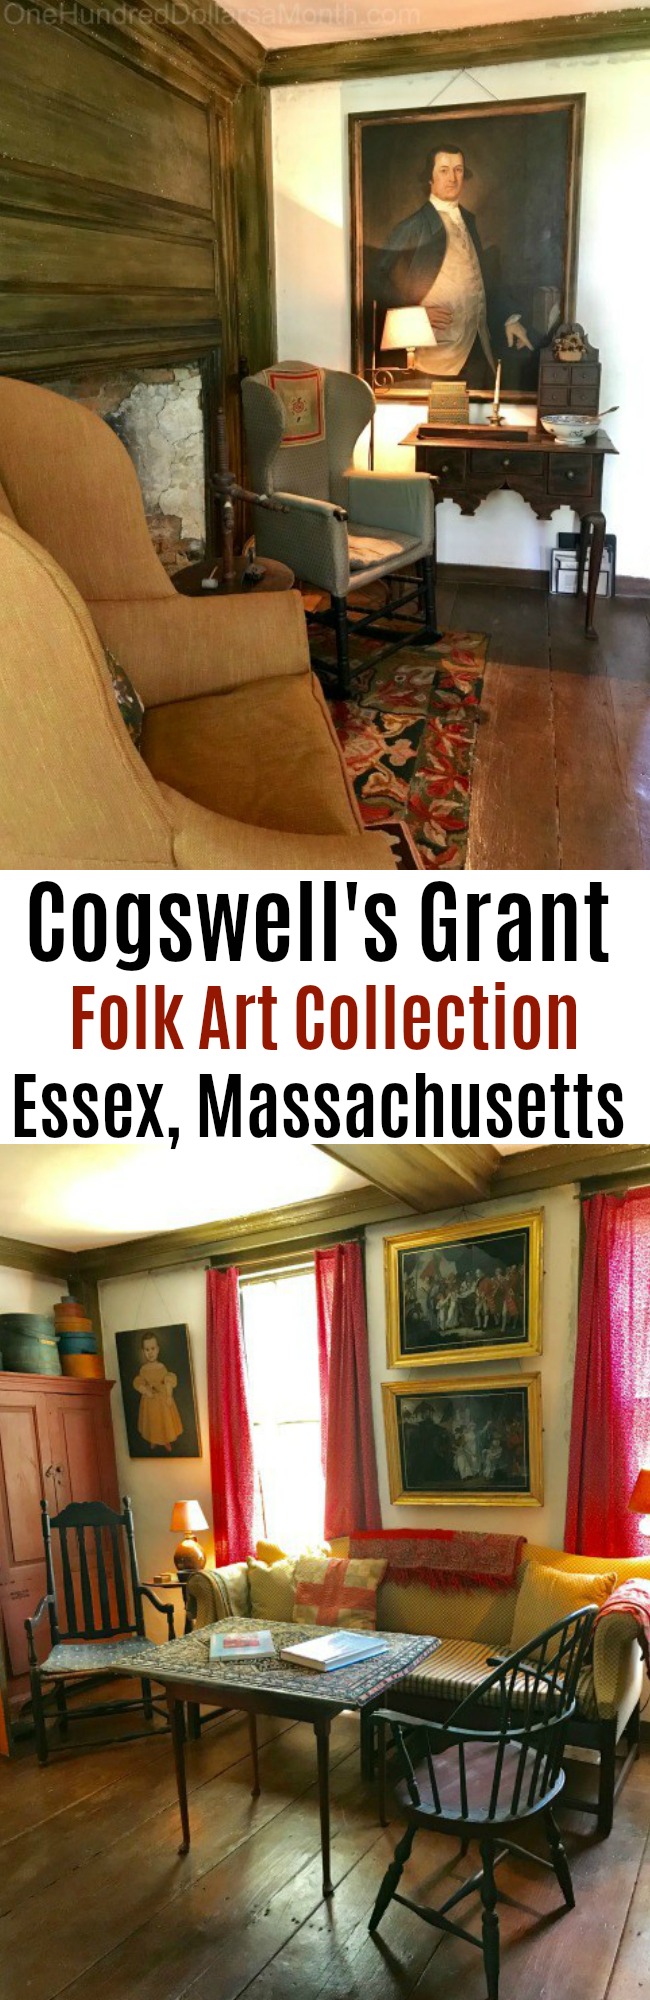 Cogswell’s Grant Estate and American Folk Art Collection in Essex, Massachusetts